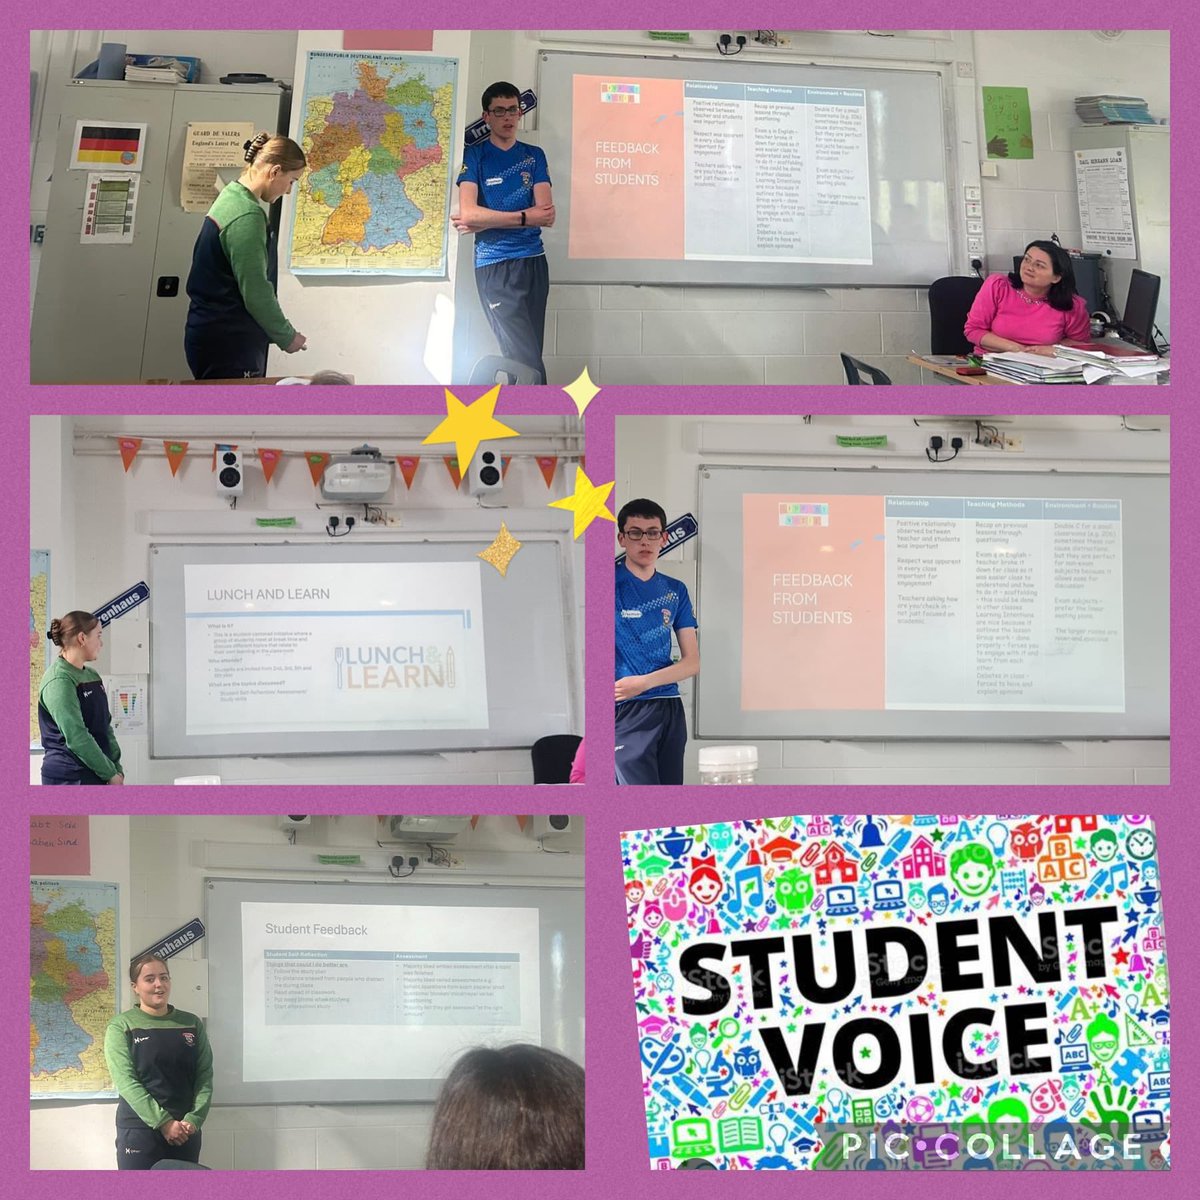 Students from our Lunch&Learn group and Spotlite initiative gave a presentation to the teachers at our staff meeting. They shared their feedback and learning experiences #studentvoice #sse #t&l @TipperaryETB